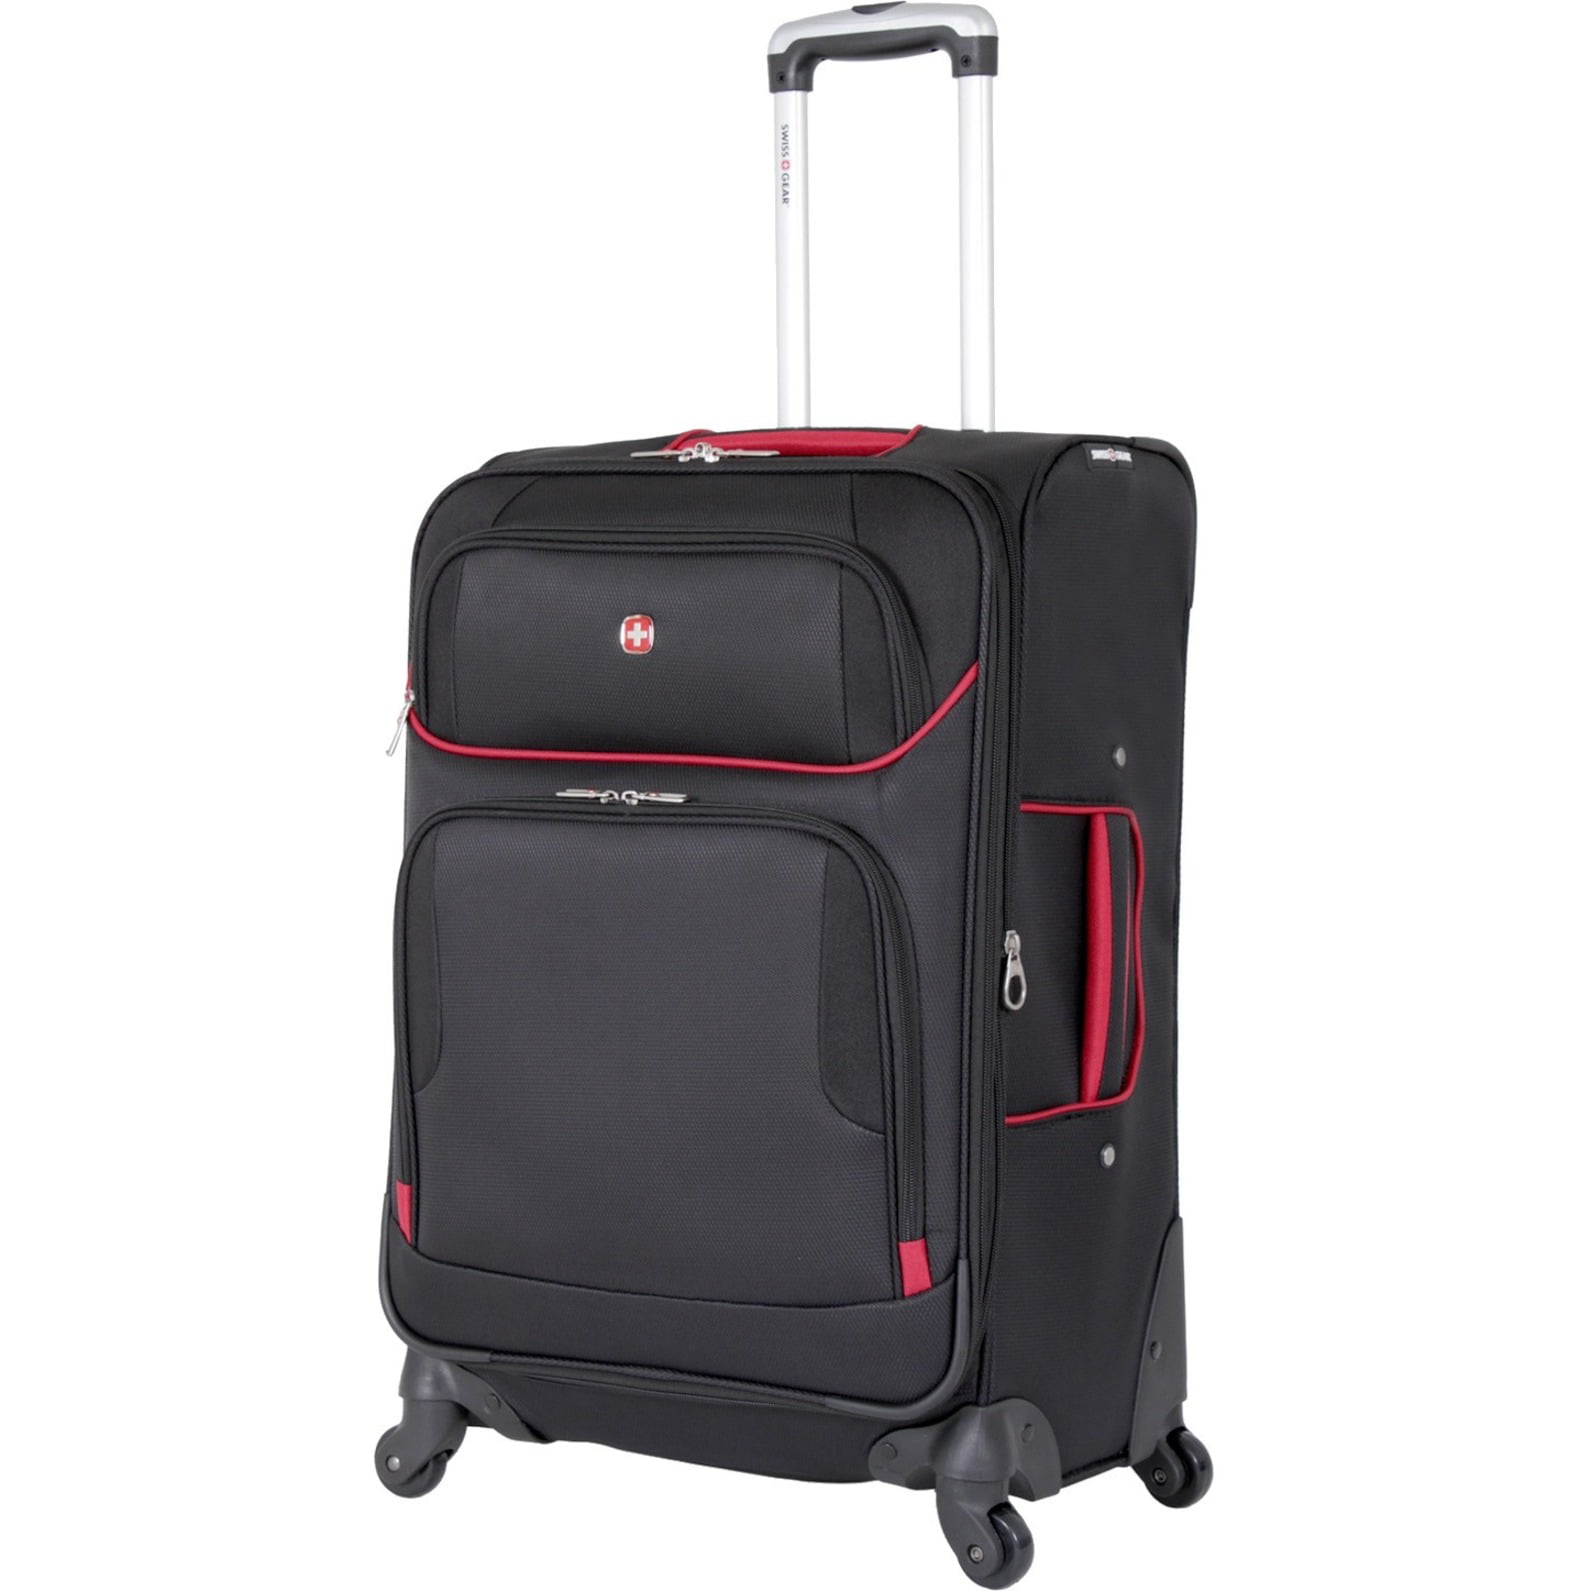 Wenger Expandable Lightweight Luggage 24 Spinner Upright Suitcase ...